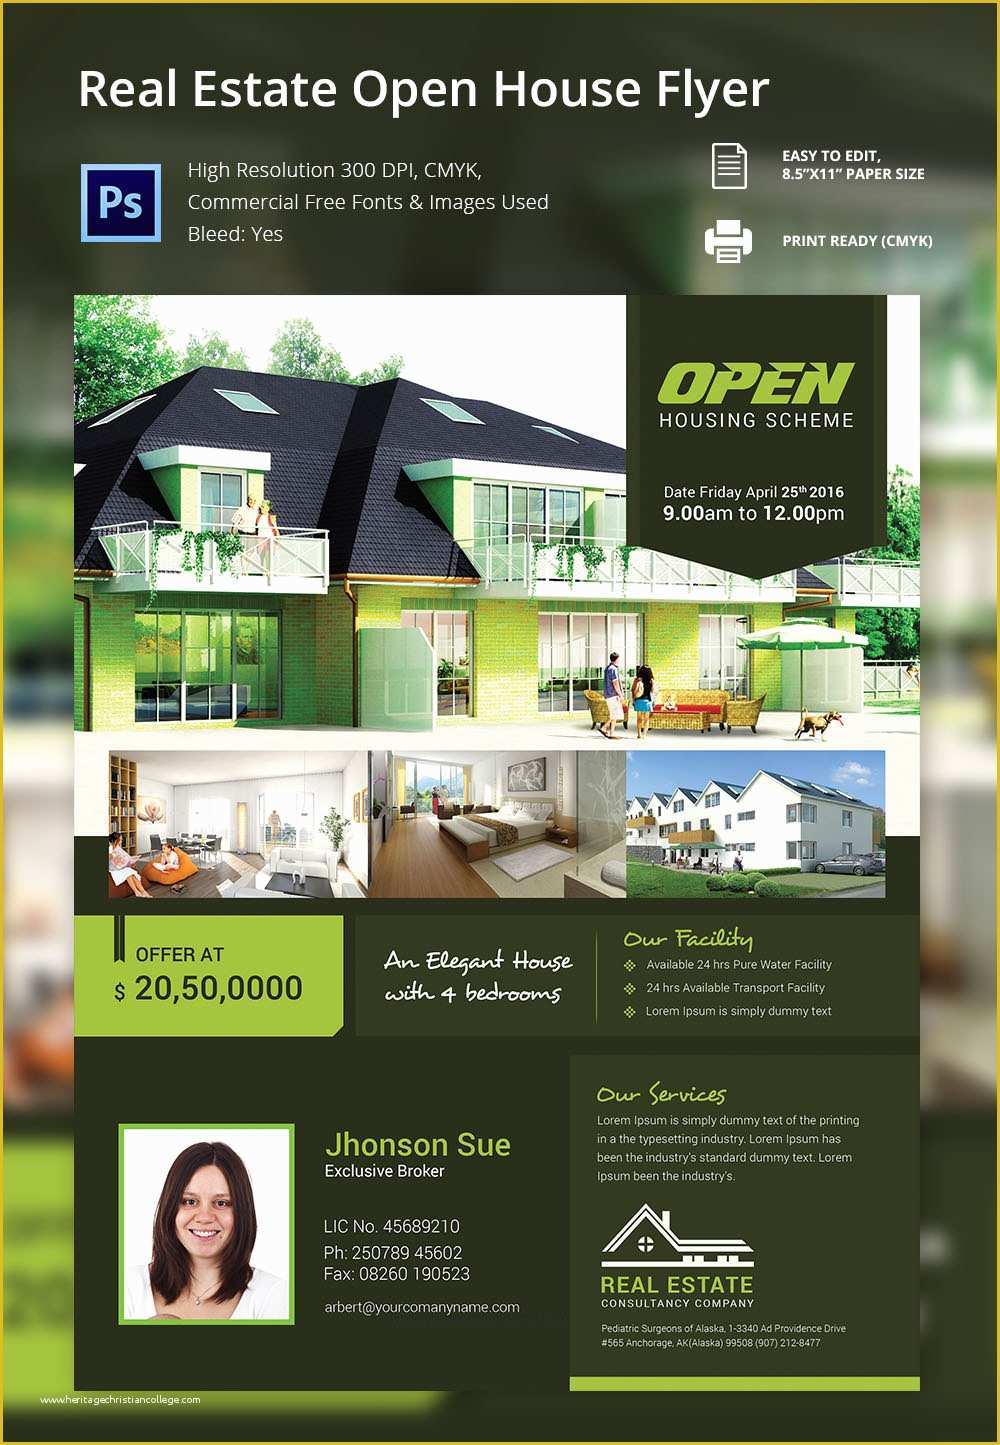 Real Estate Brochure Template Free Download Of Open House Flyer Free Psd format Download Brochure